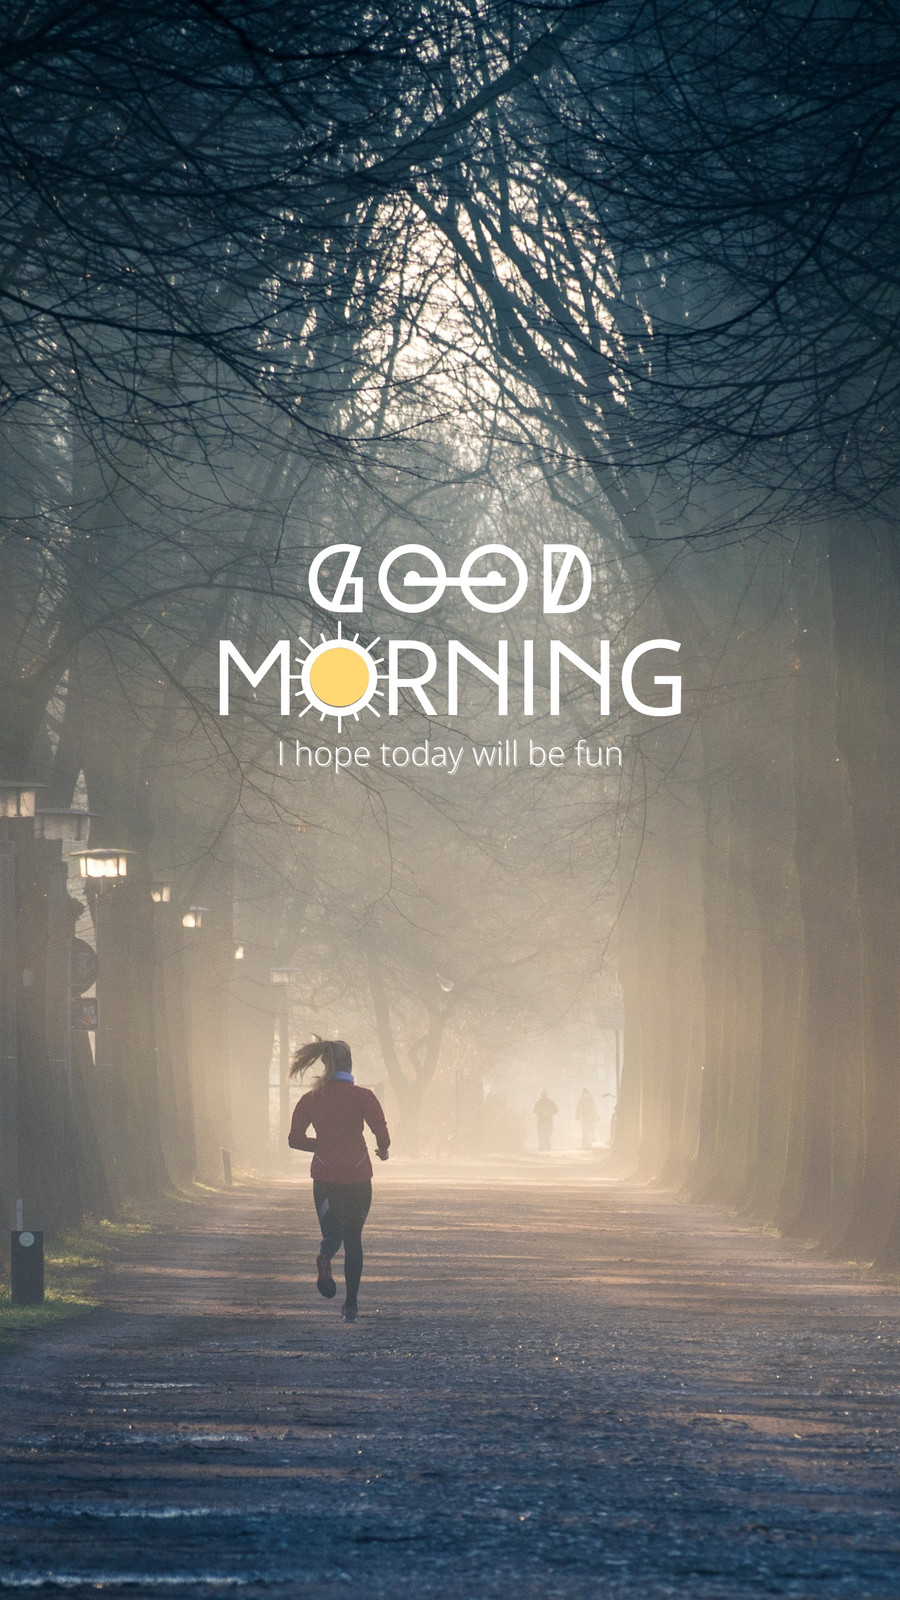 Free and customizable good morning wallpaper templates